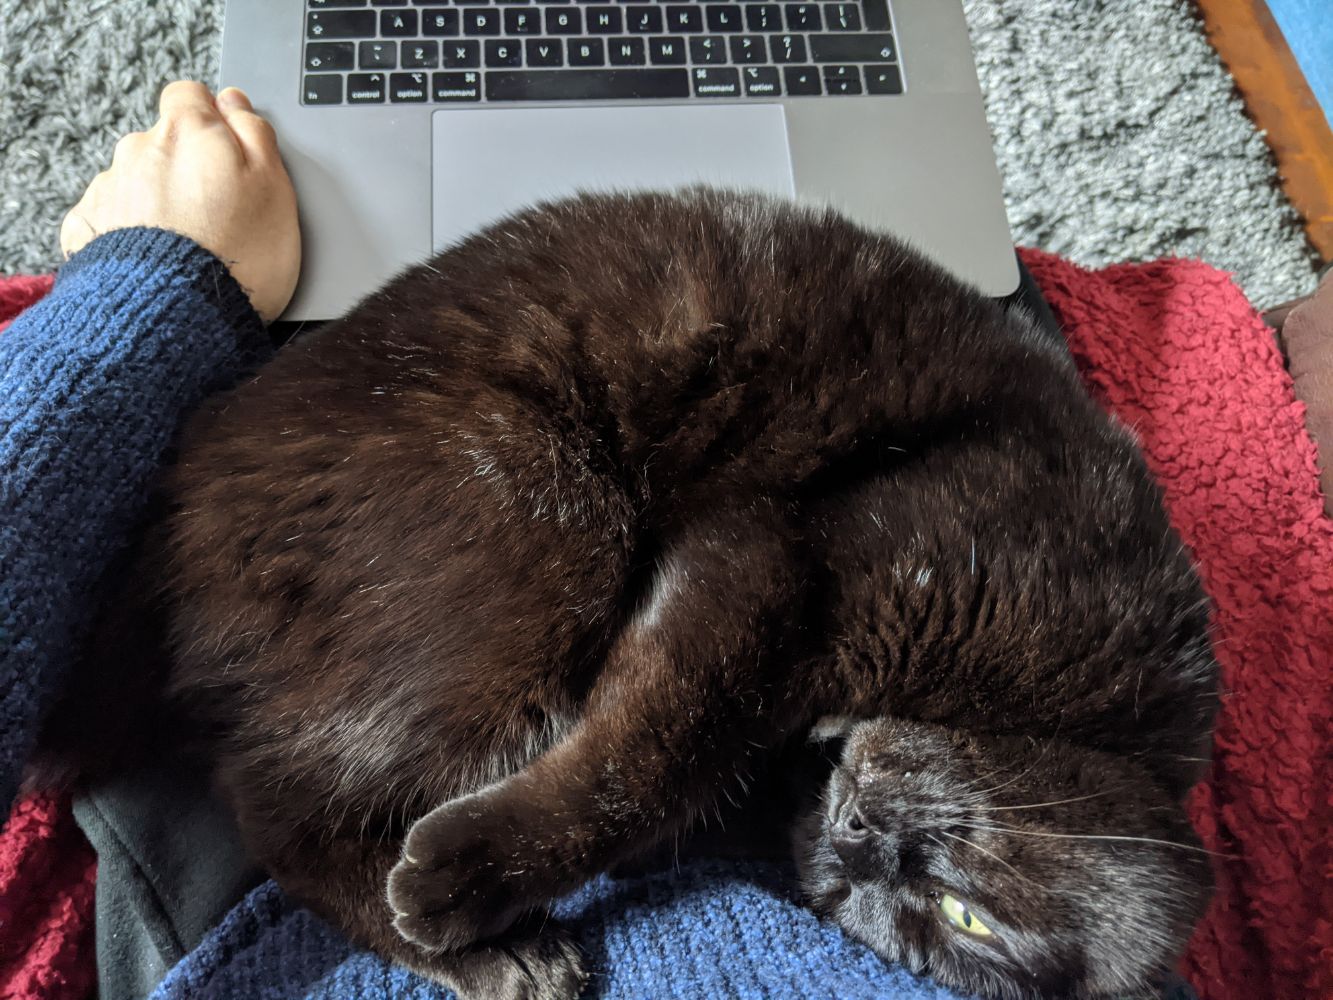 Jamie sitting with his laptop on the edge of his knees, with a black cat flopped on his side on his lap